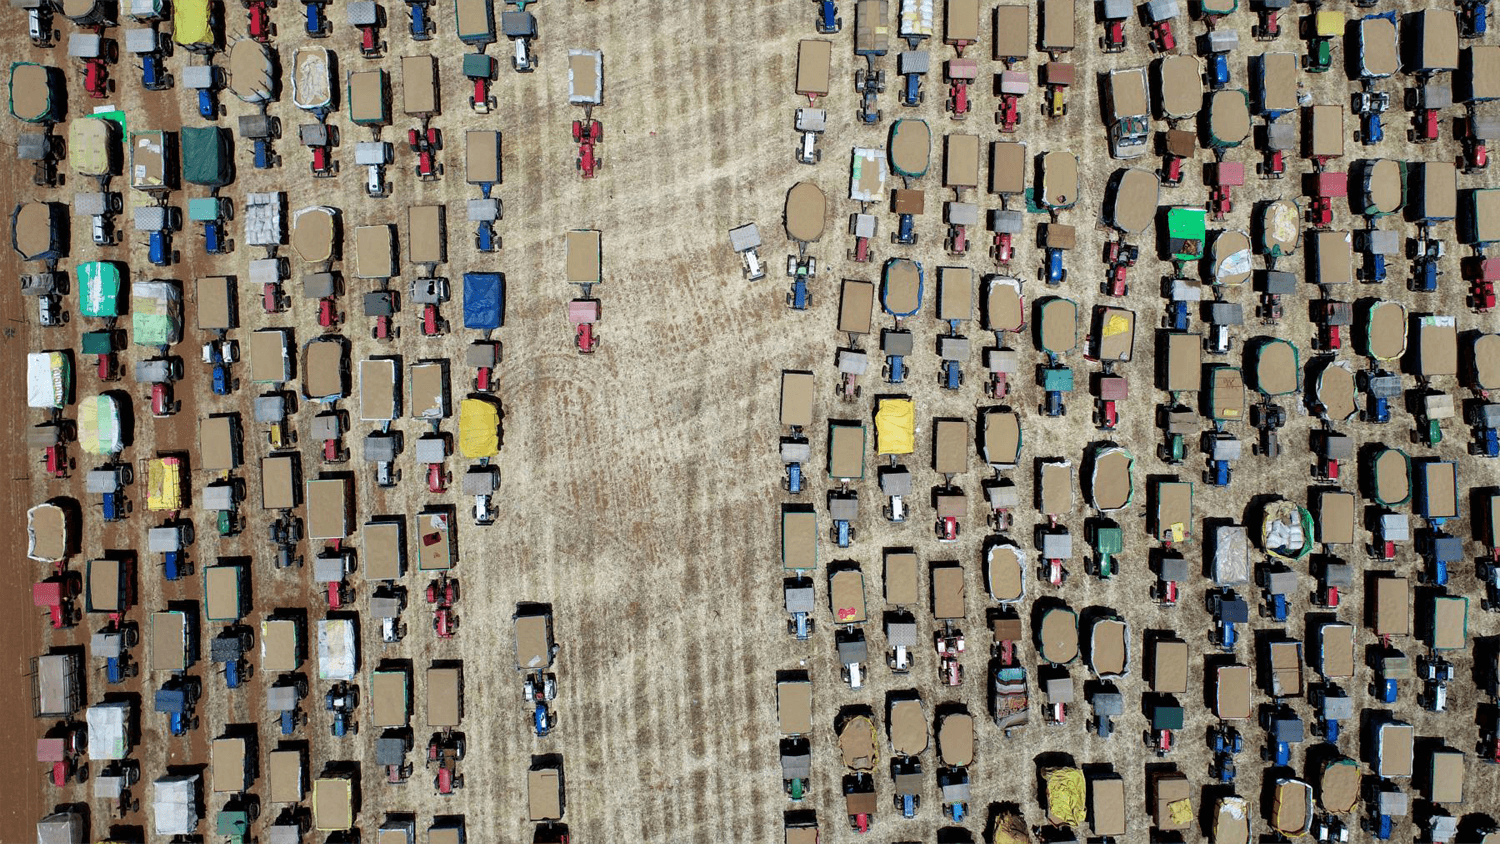 Birdseye view of tractors lined up in rows